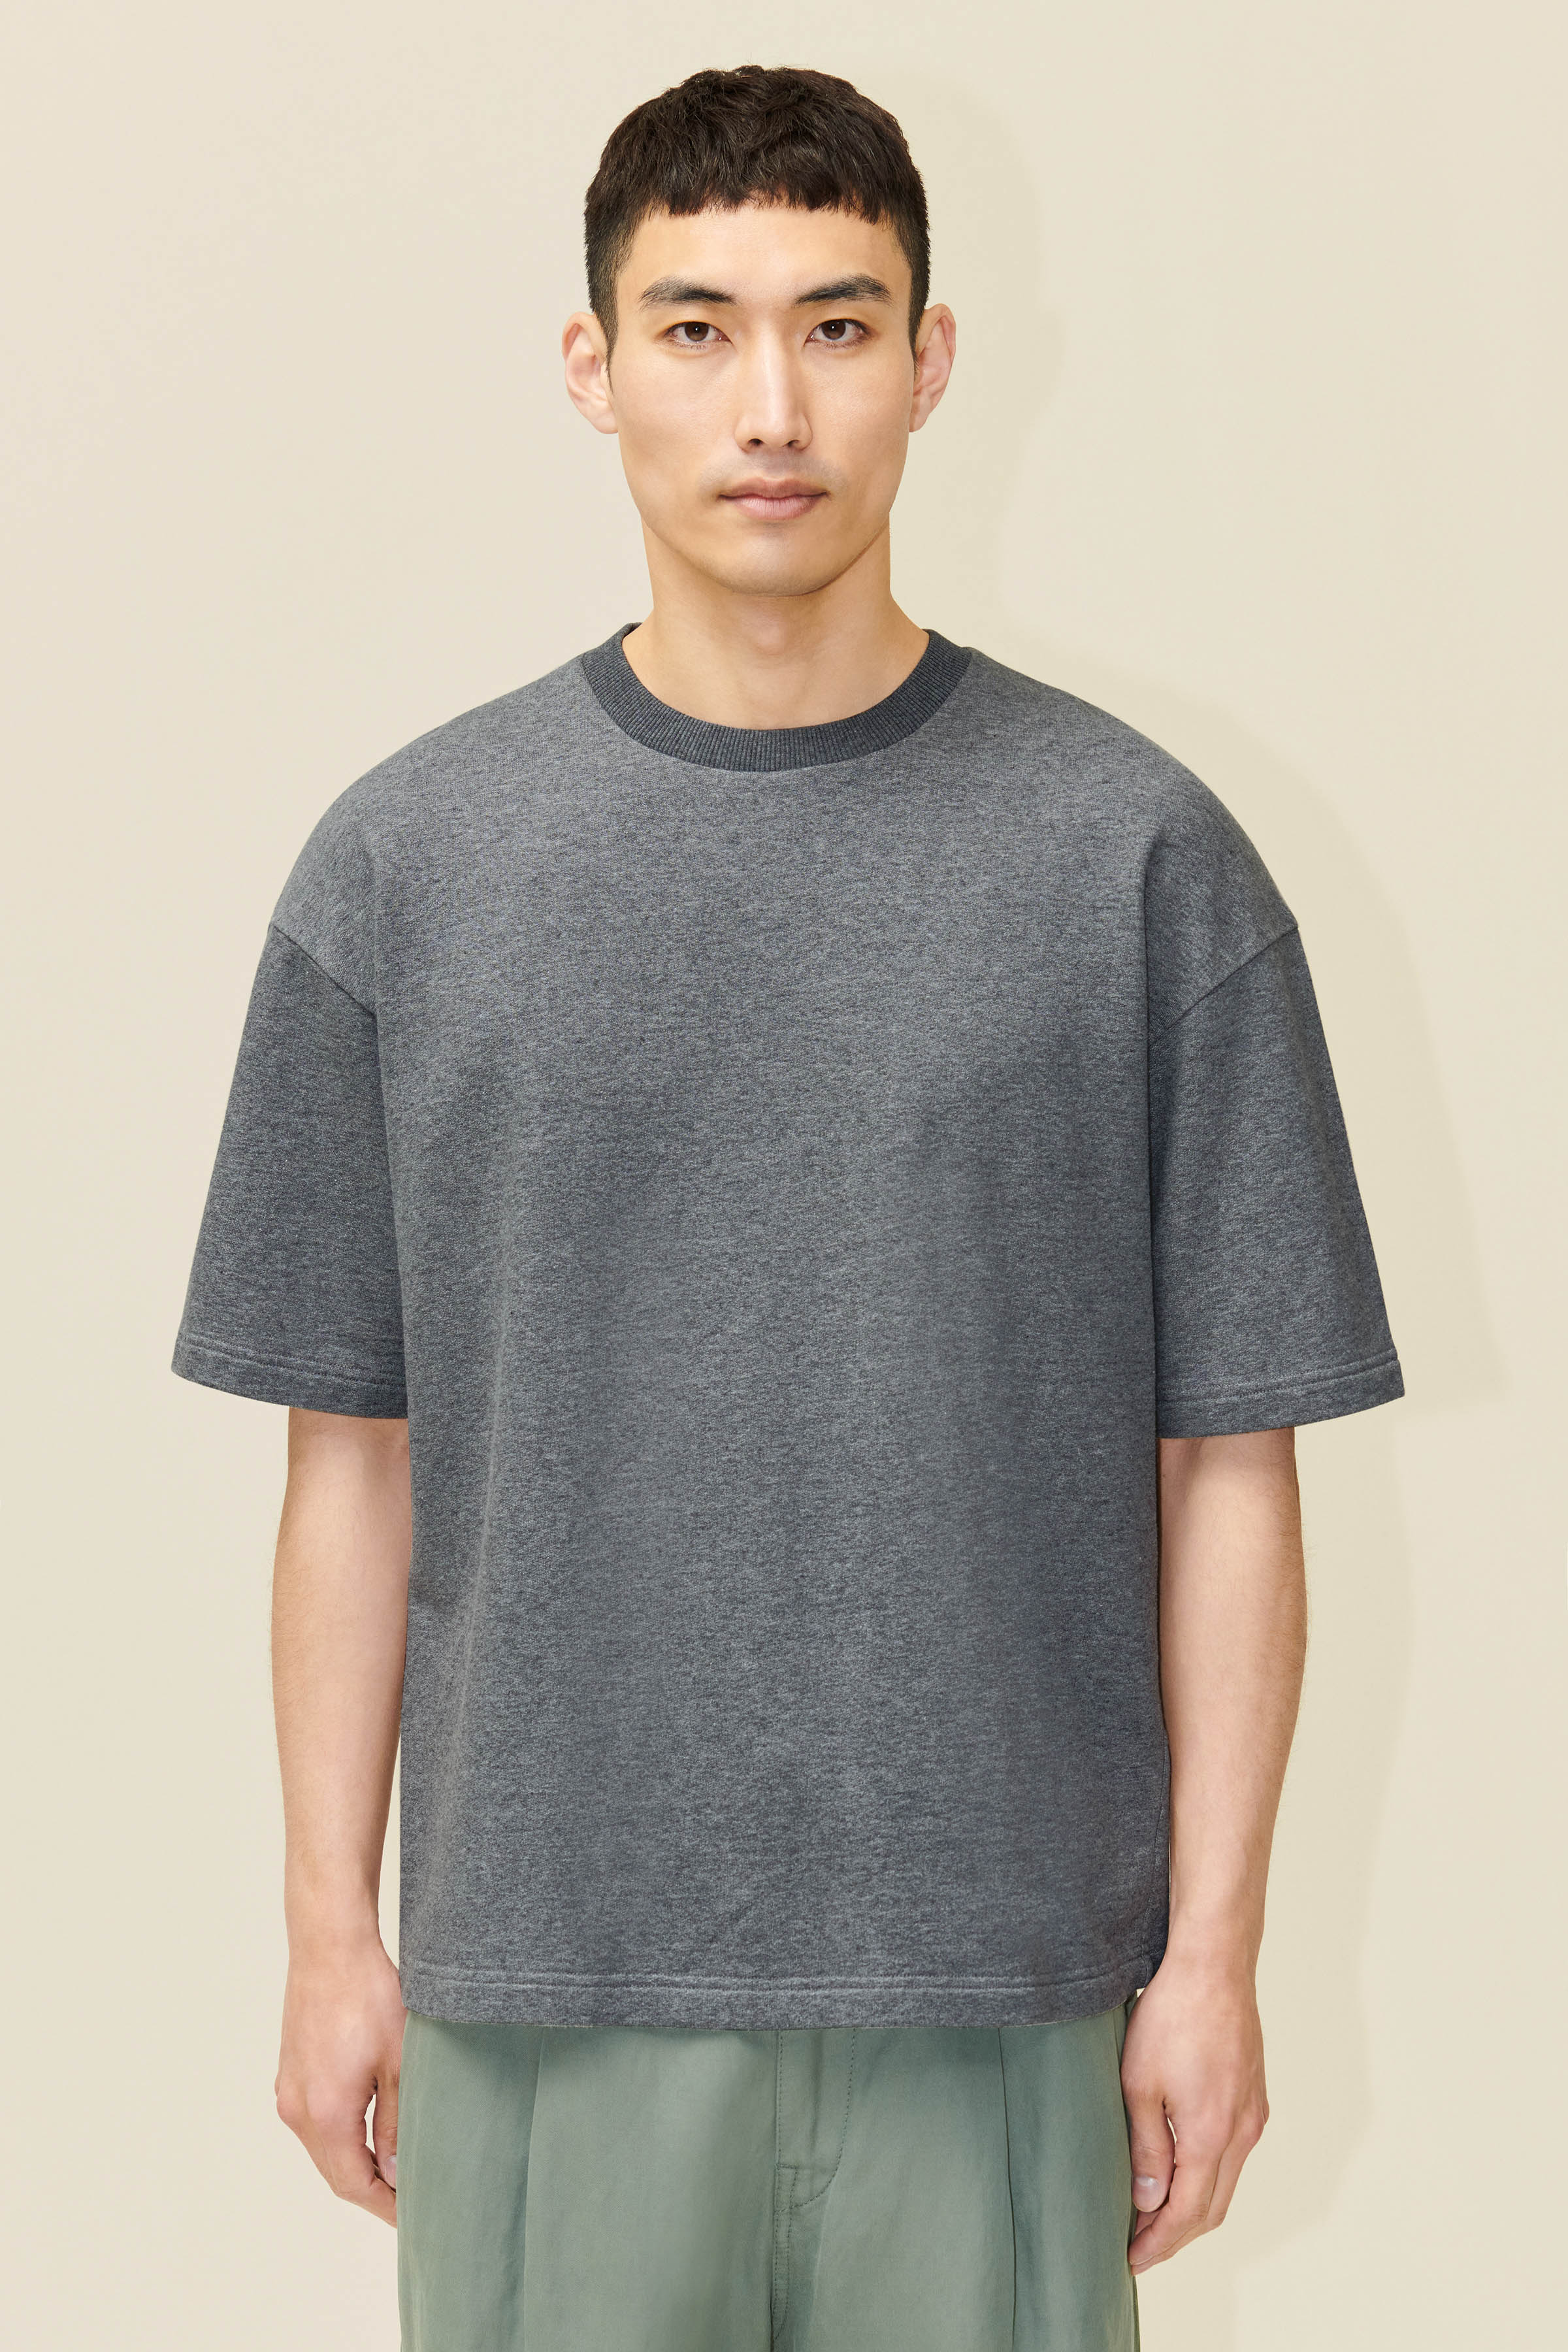 The PACKSTON sweat t-shirt has a loose oversized fit and extended ...